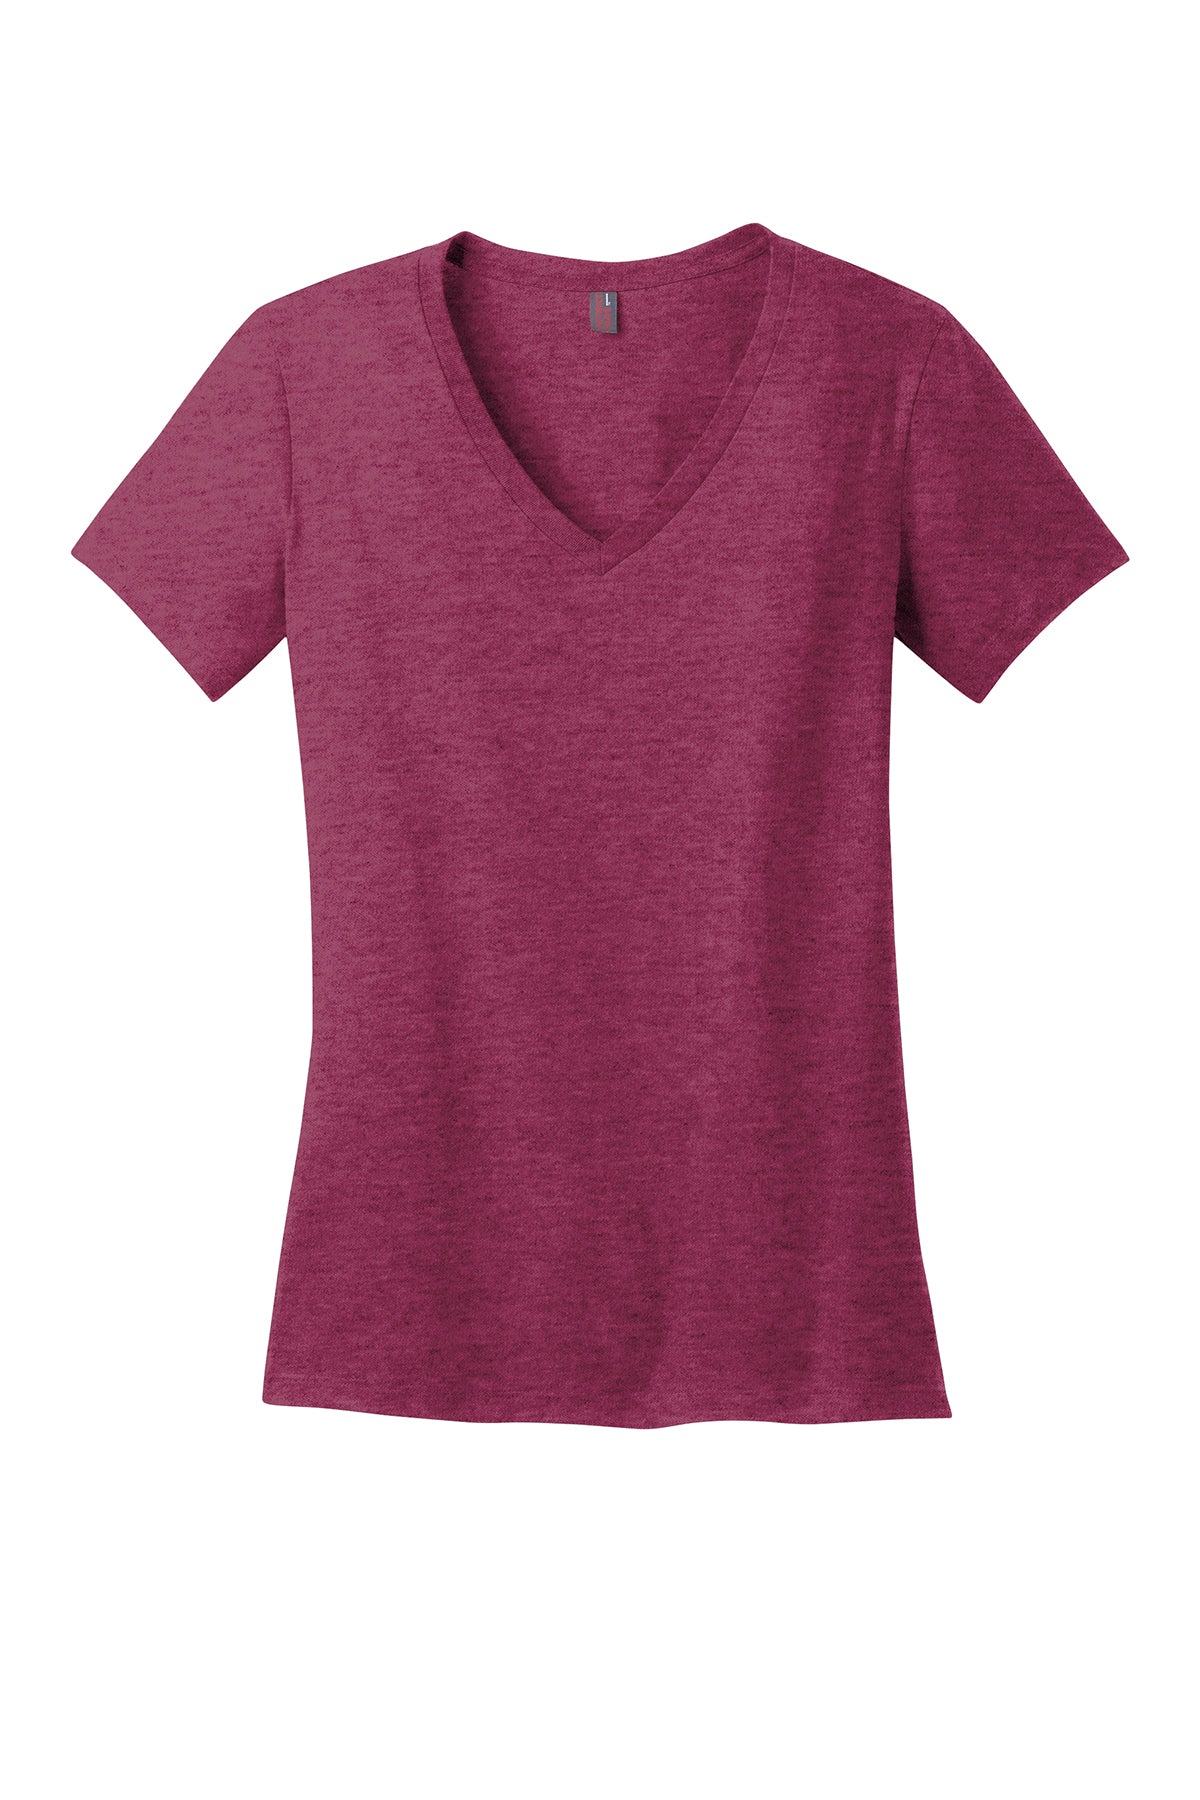 DM1170L District ® Women’s Perfect Weight ® V-Neck Tee. XS-4XL